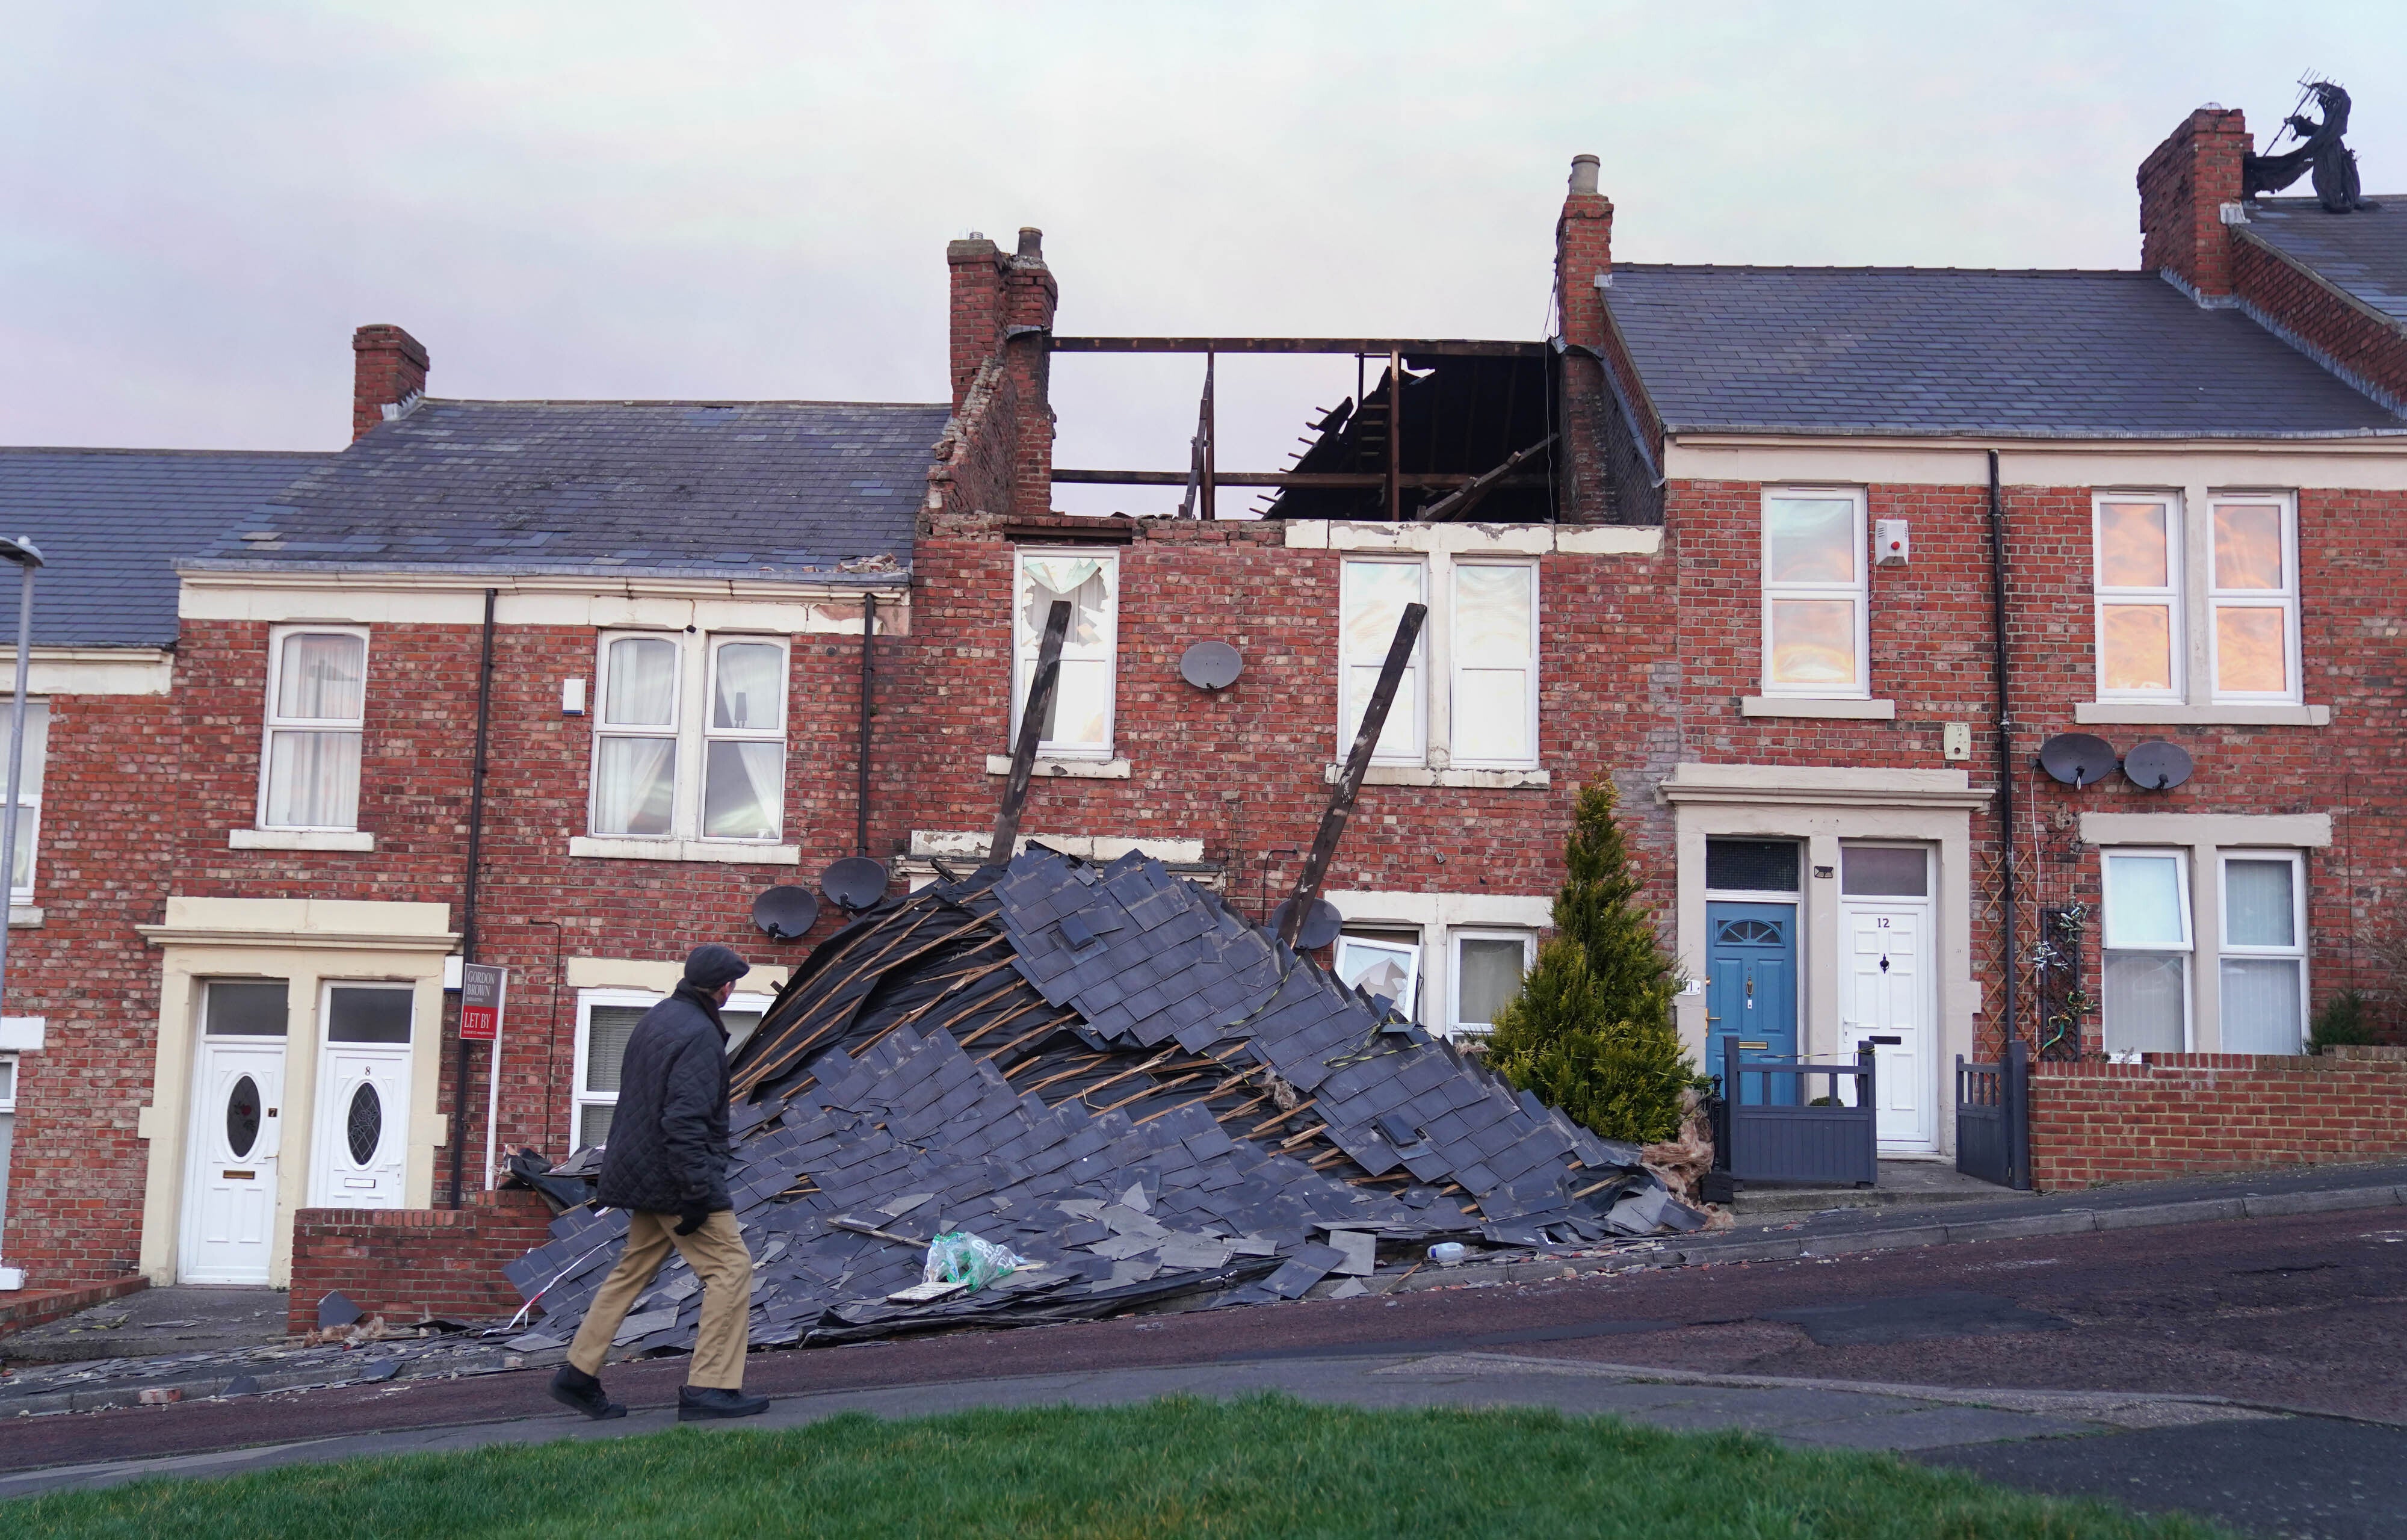 Storm Malik tore across the country and caused damage to properties and land (Owen Humphreys/PA)